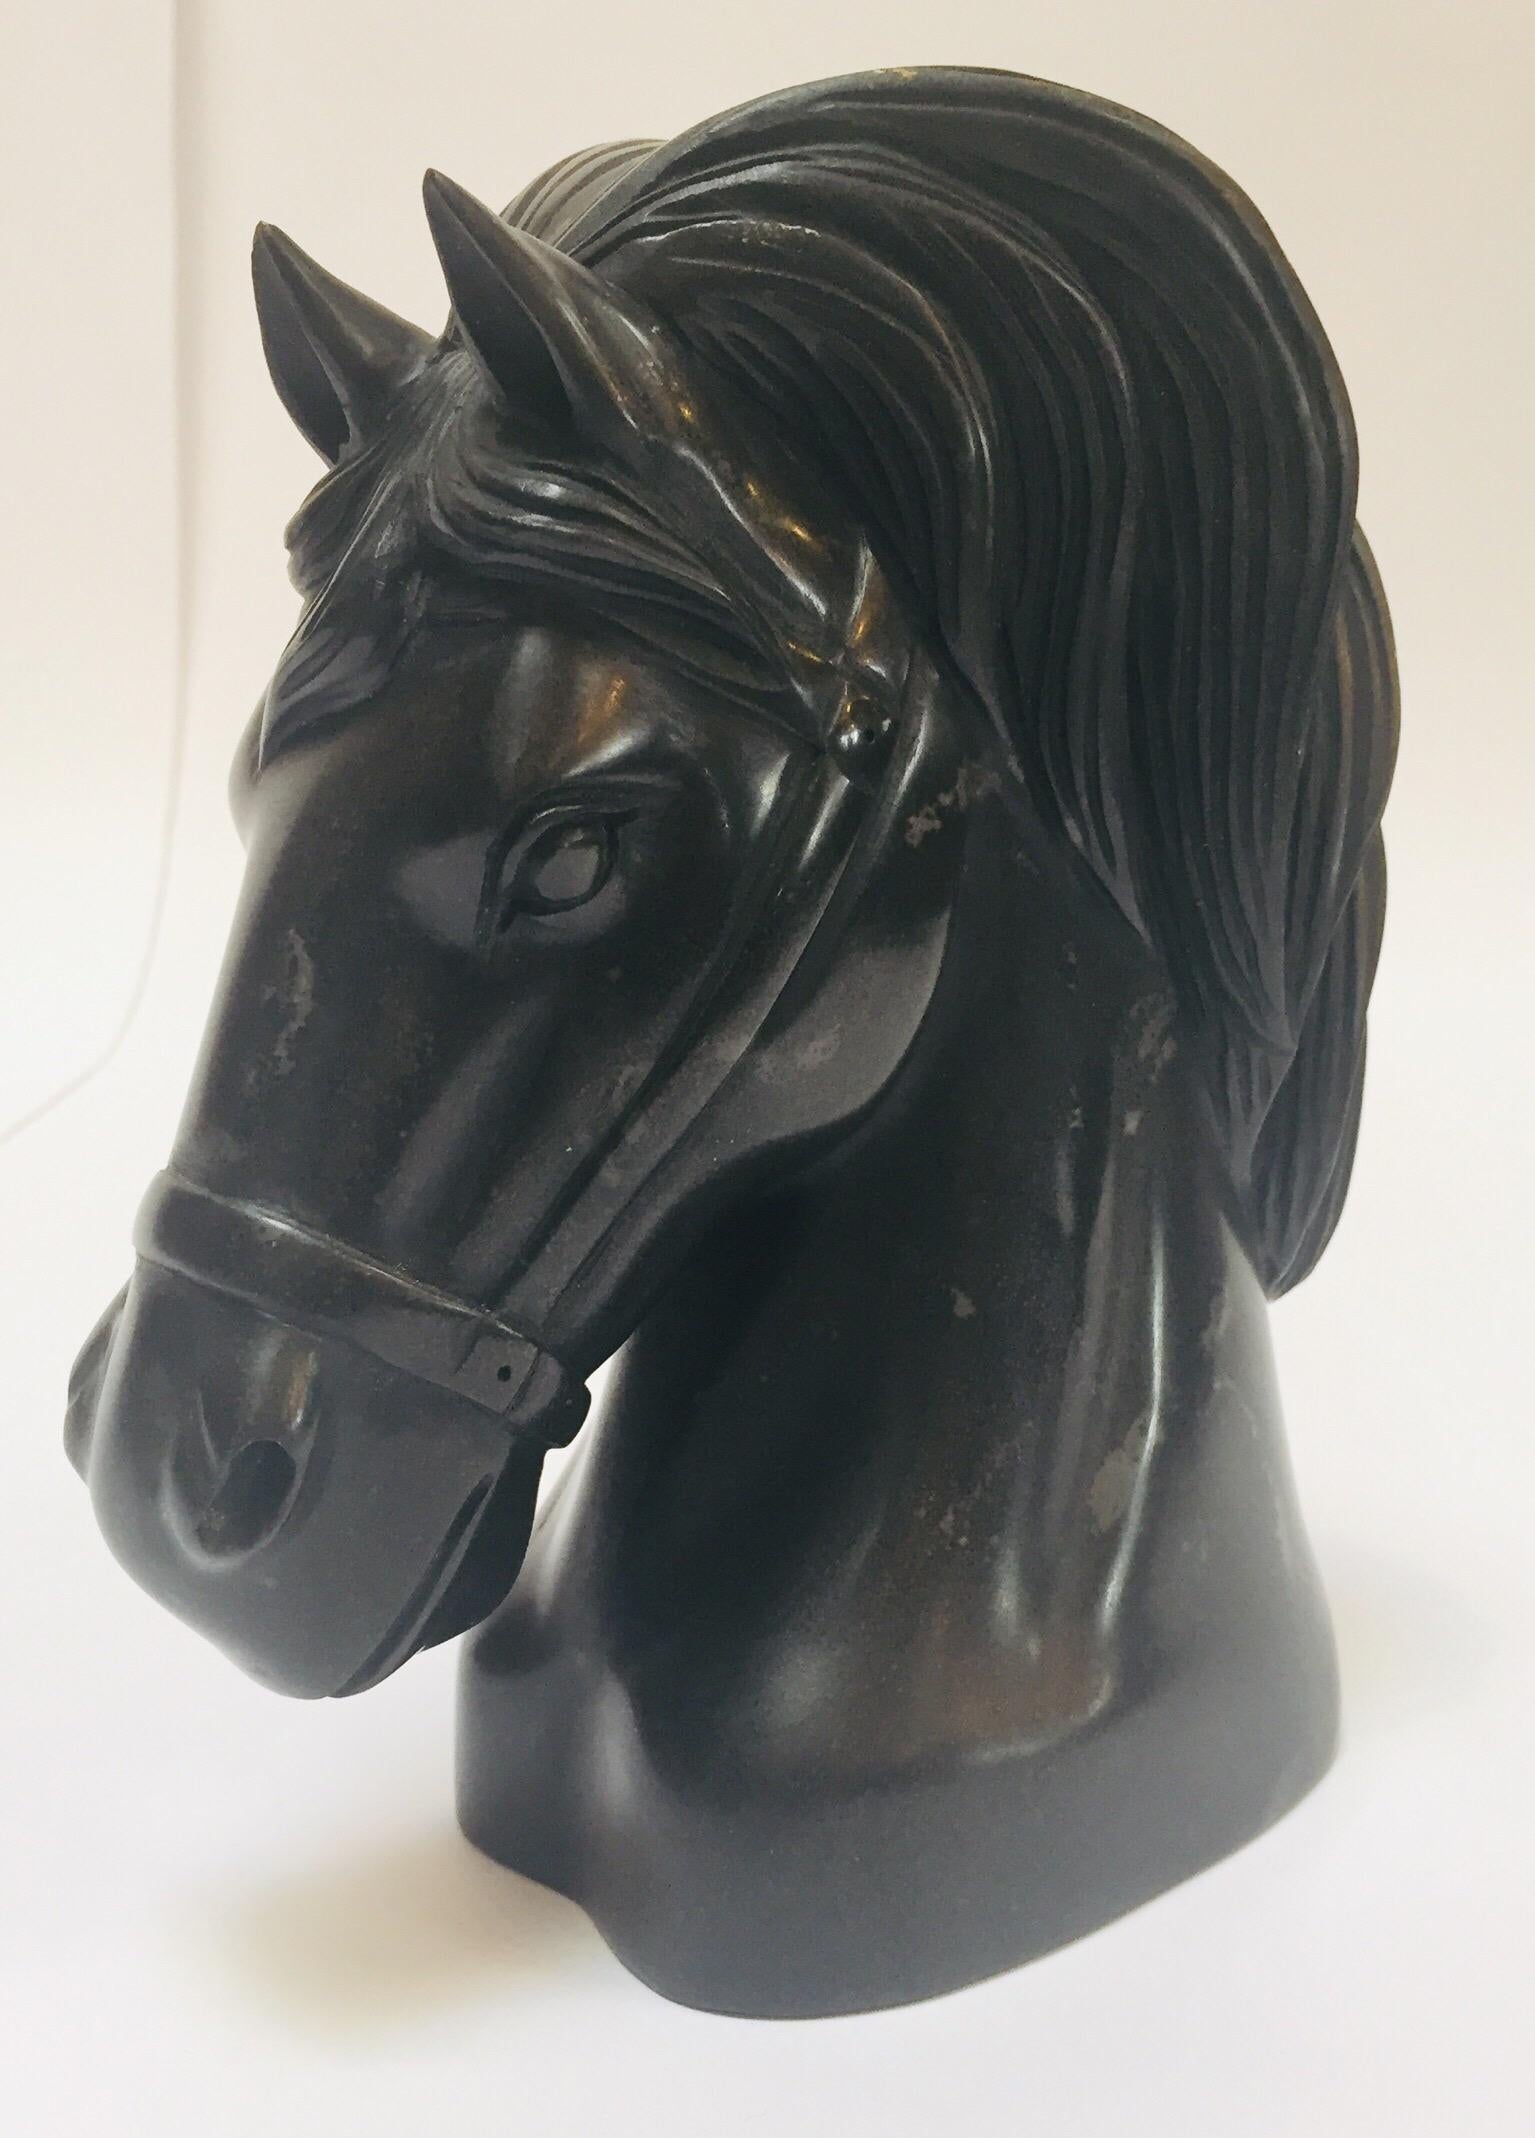 Black Marble horse head sculpture, great to use on a desk as a paper weight or decorative object around the house or office.
Equestrian Gucci, Hermes style horse bust with bridle.
Measure: 4